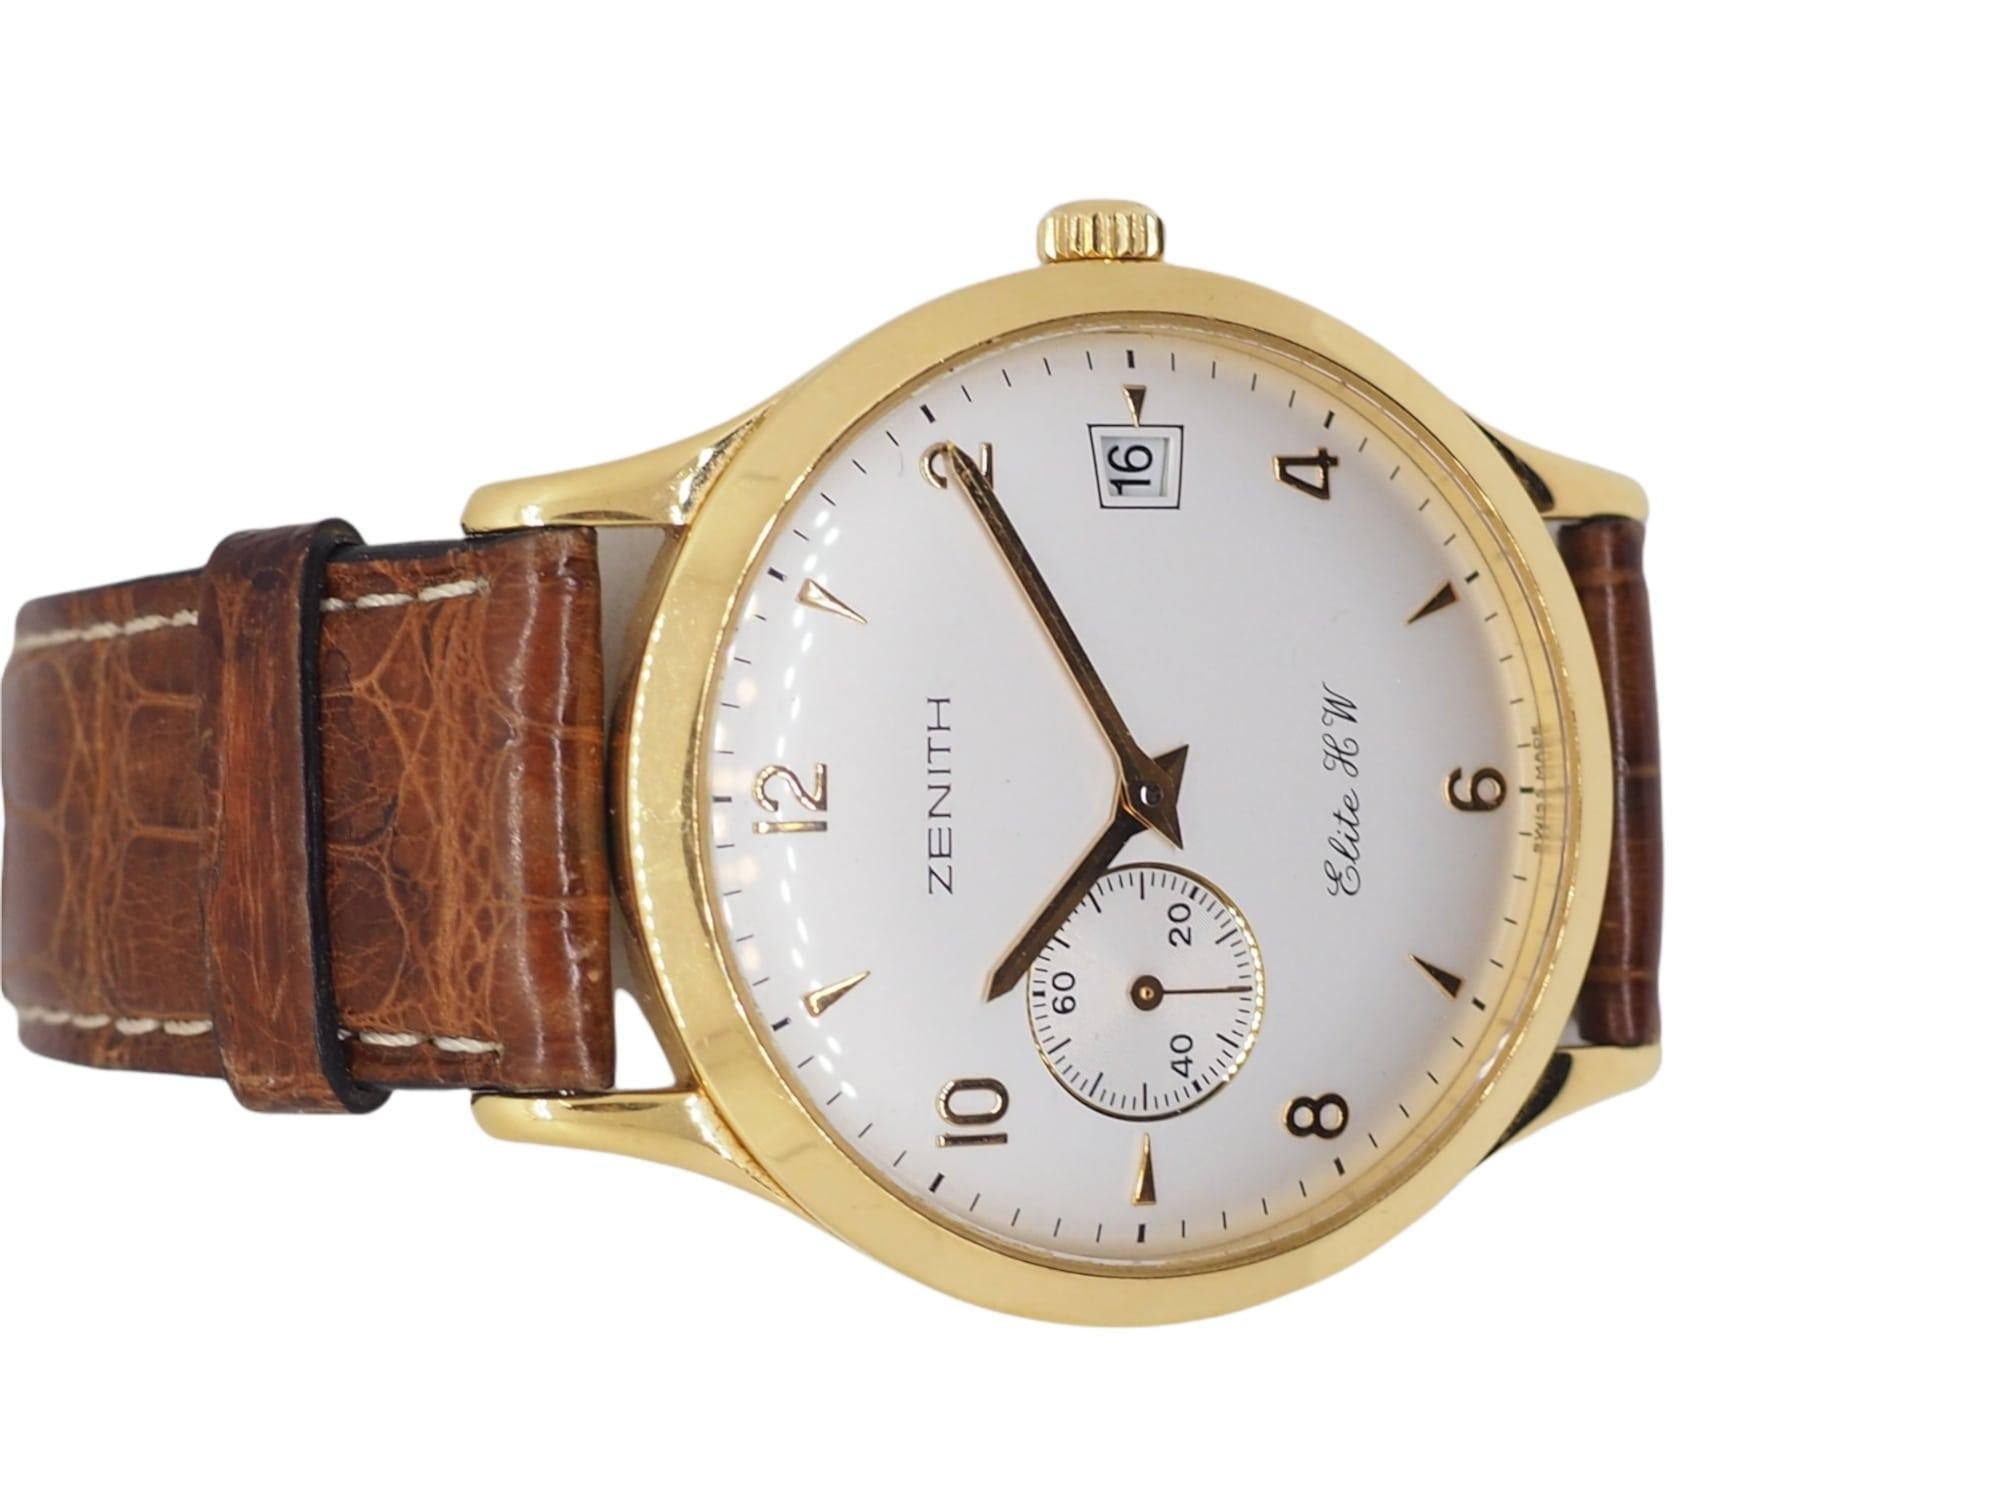 18k gold watches for men